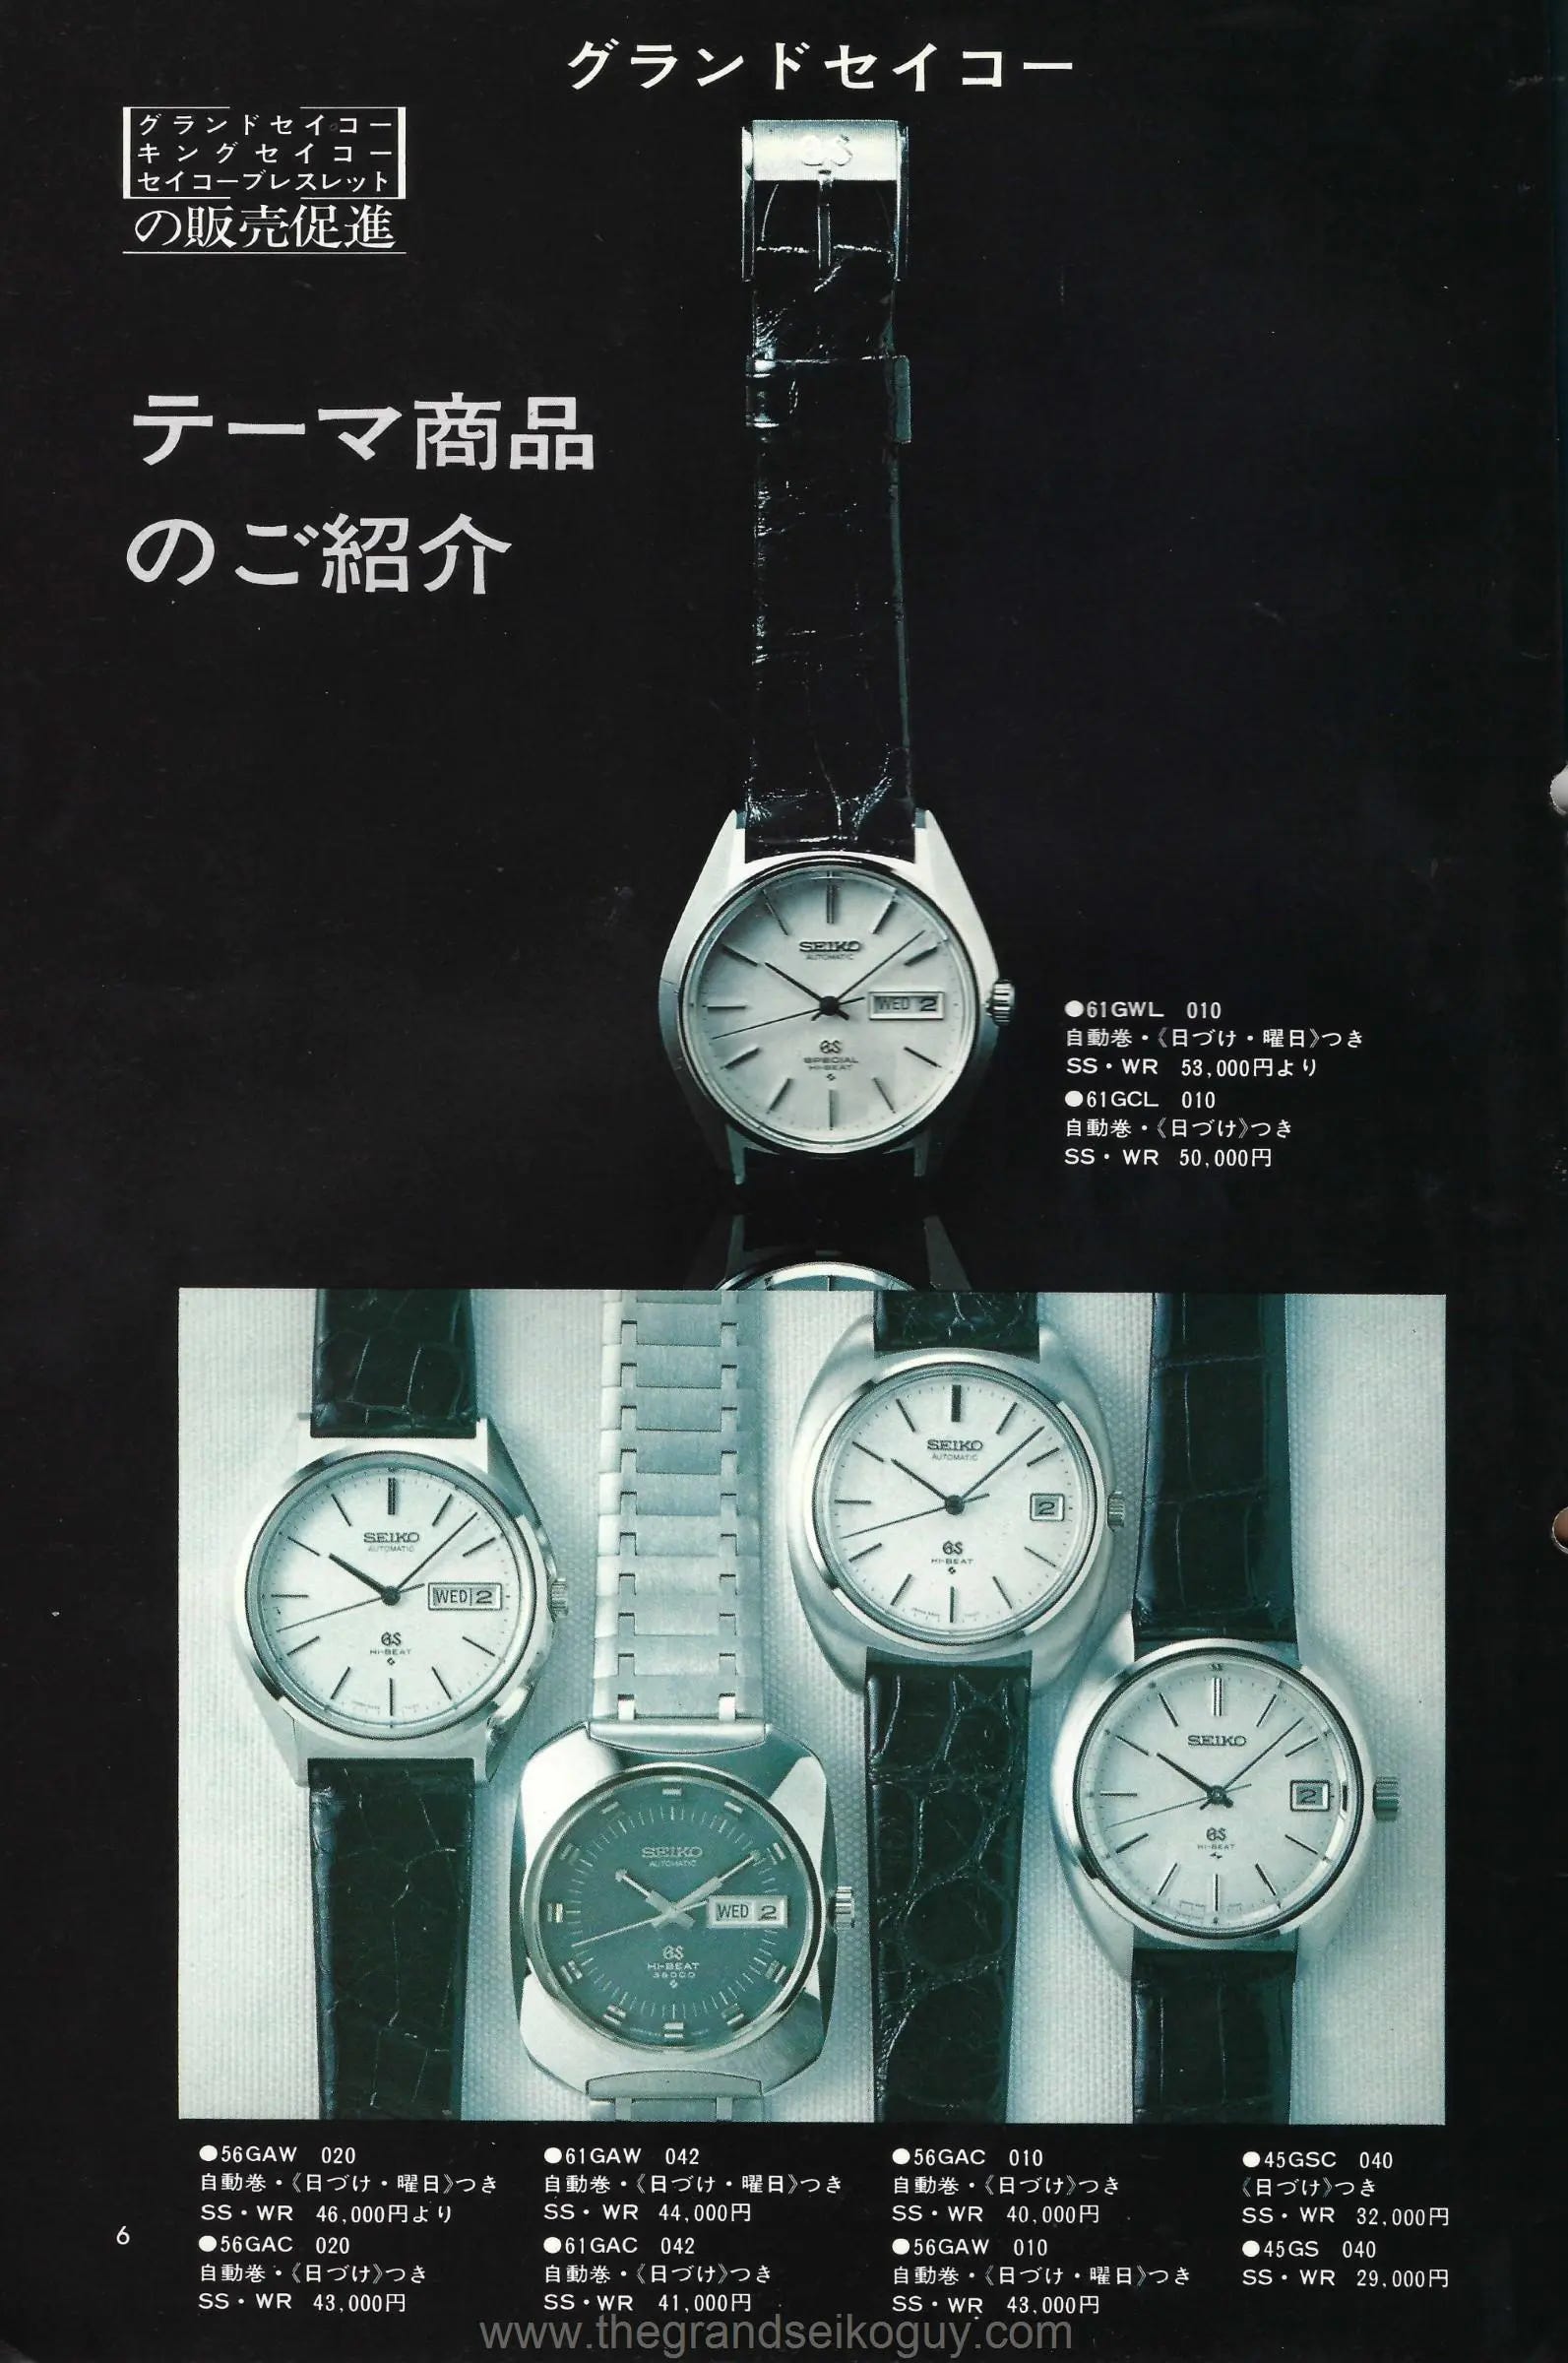 Vintage Grand Seiko models not appearing in catalogues - 45GS